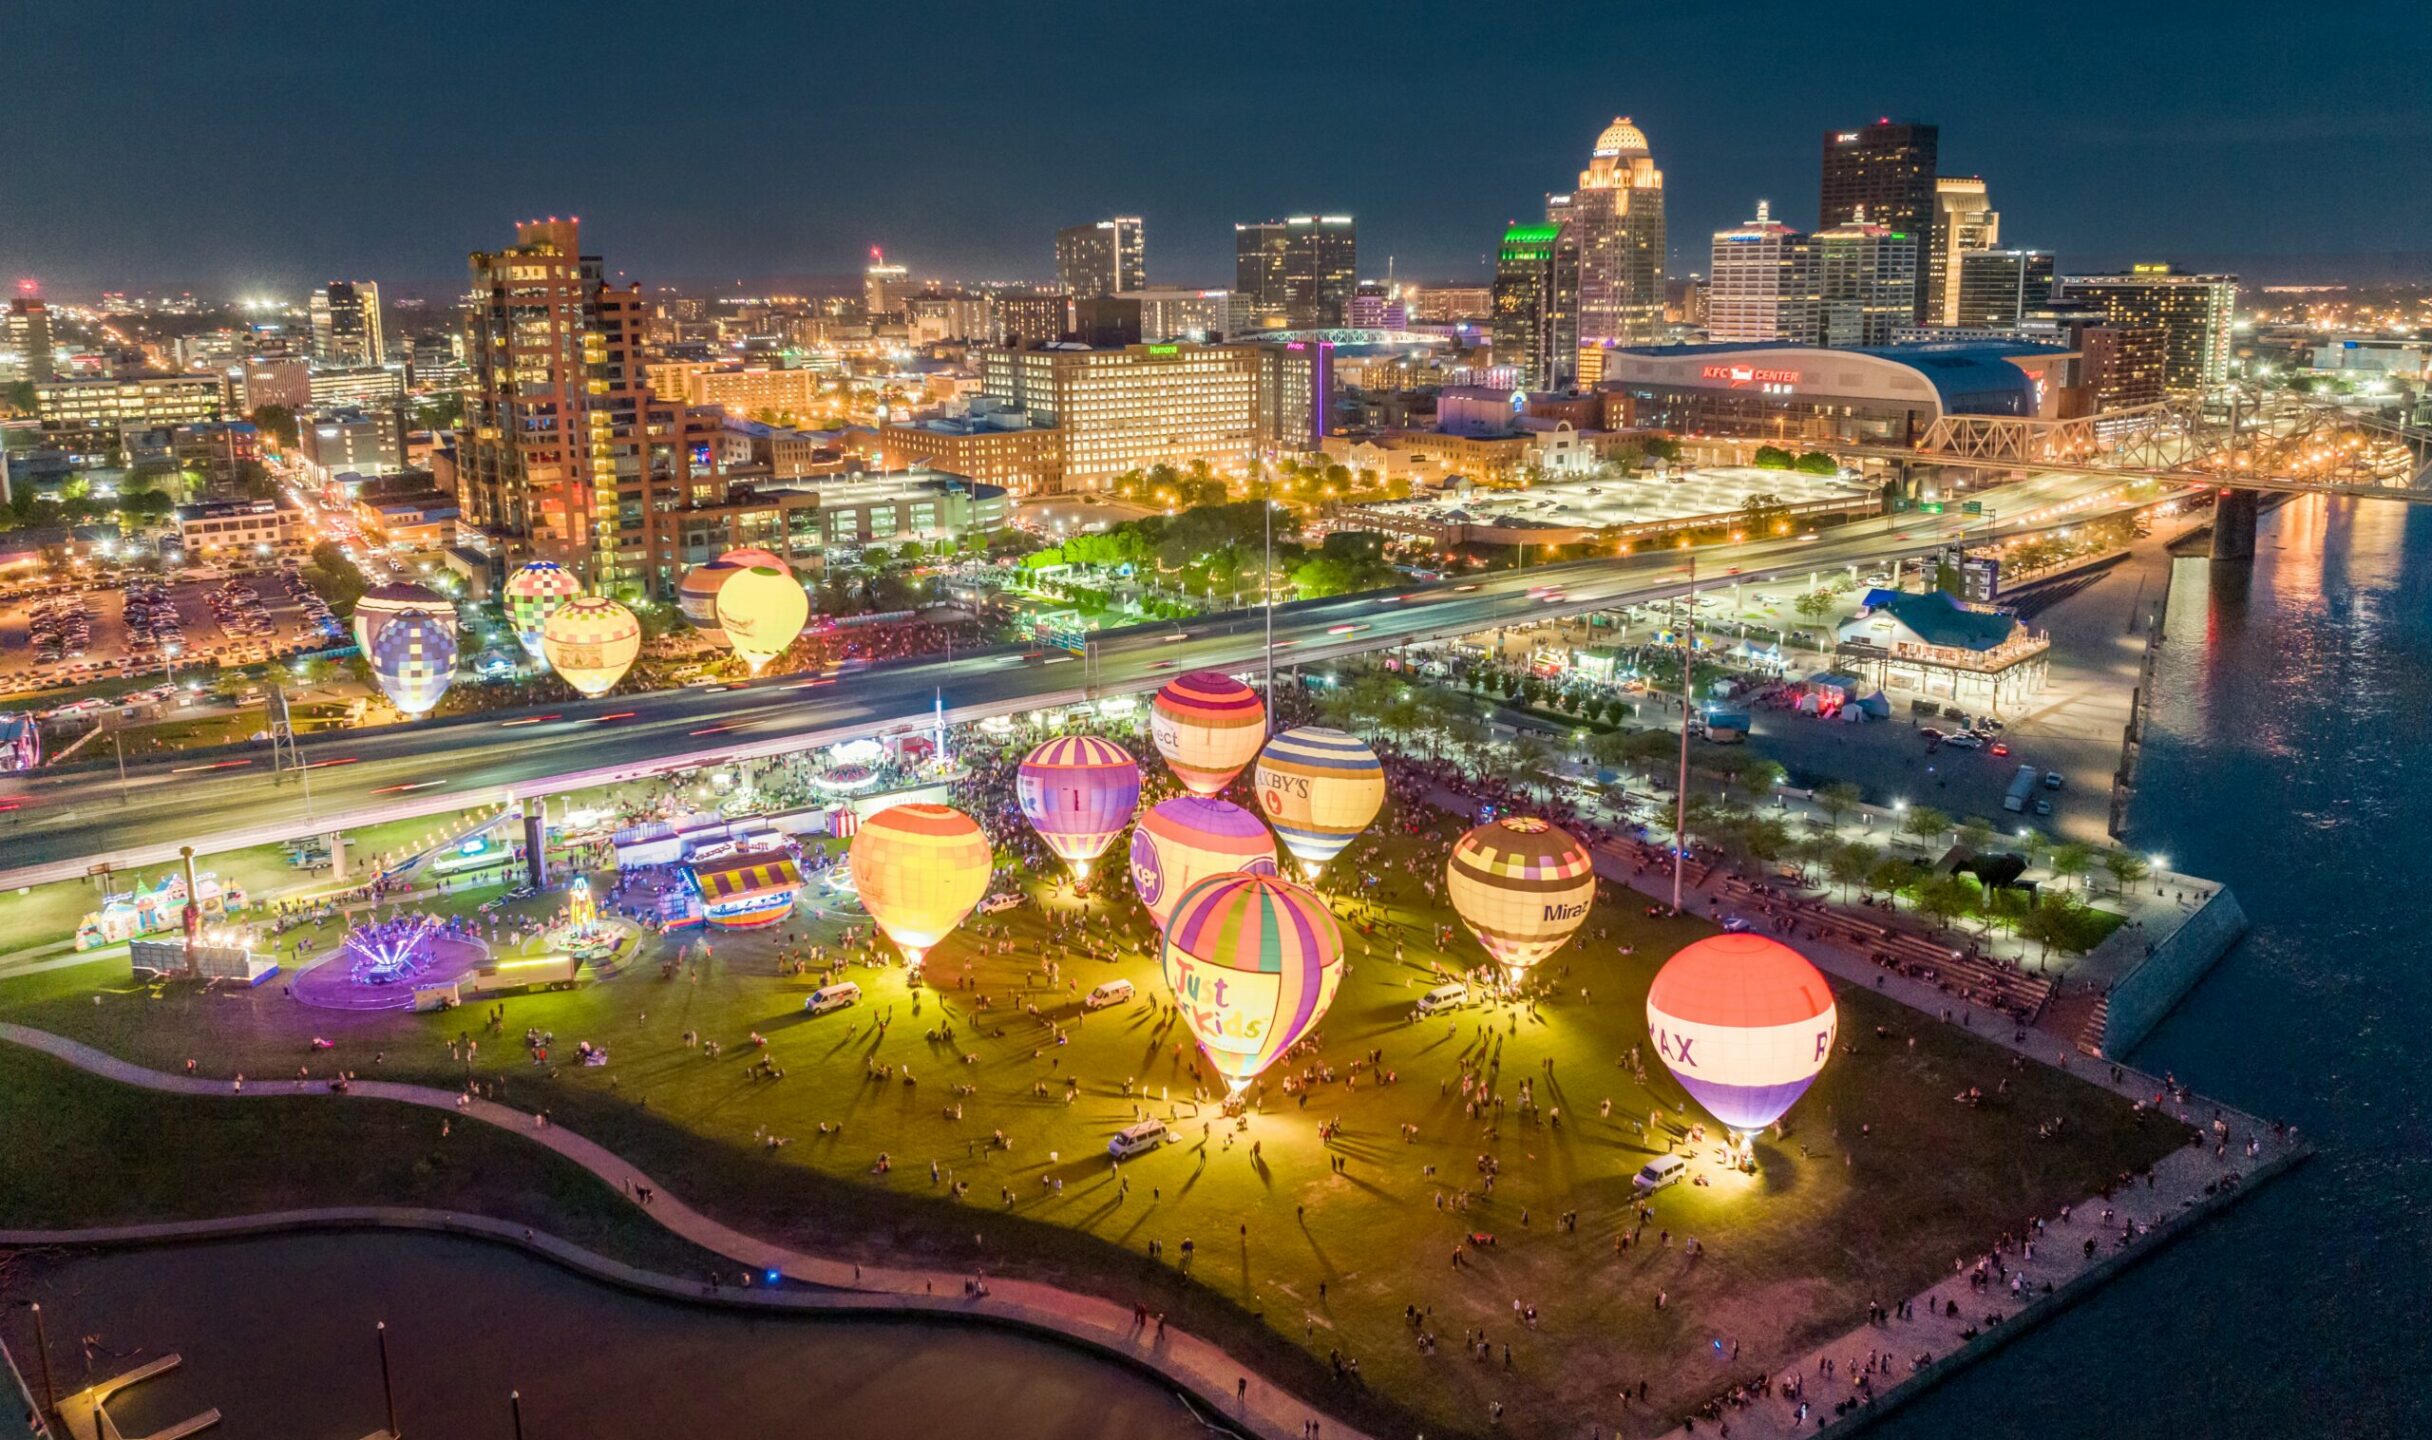 Overlook of Waterfront Park's Great Lawn with a showcase of glowing hot air balloons